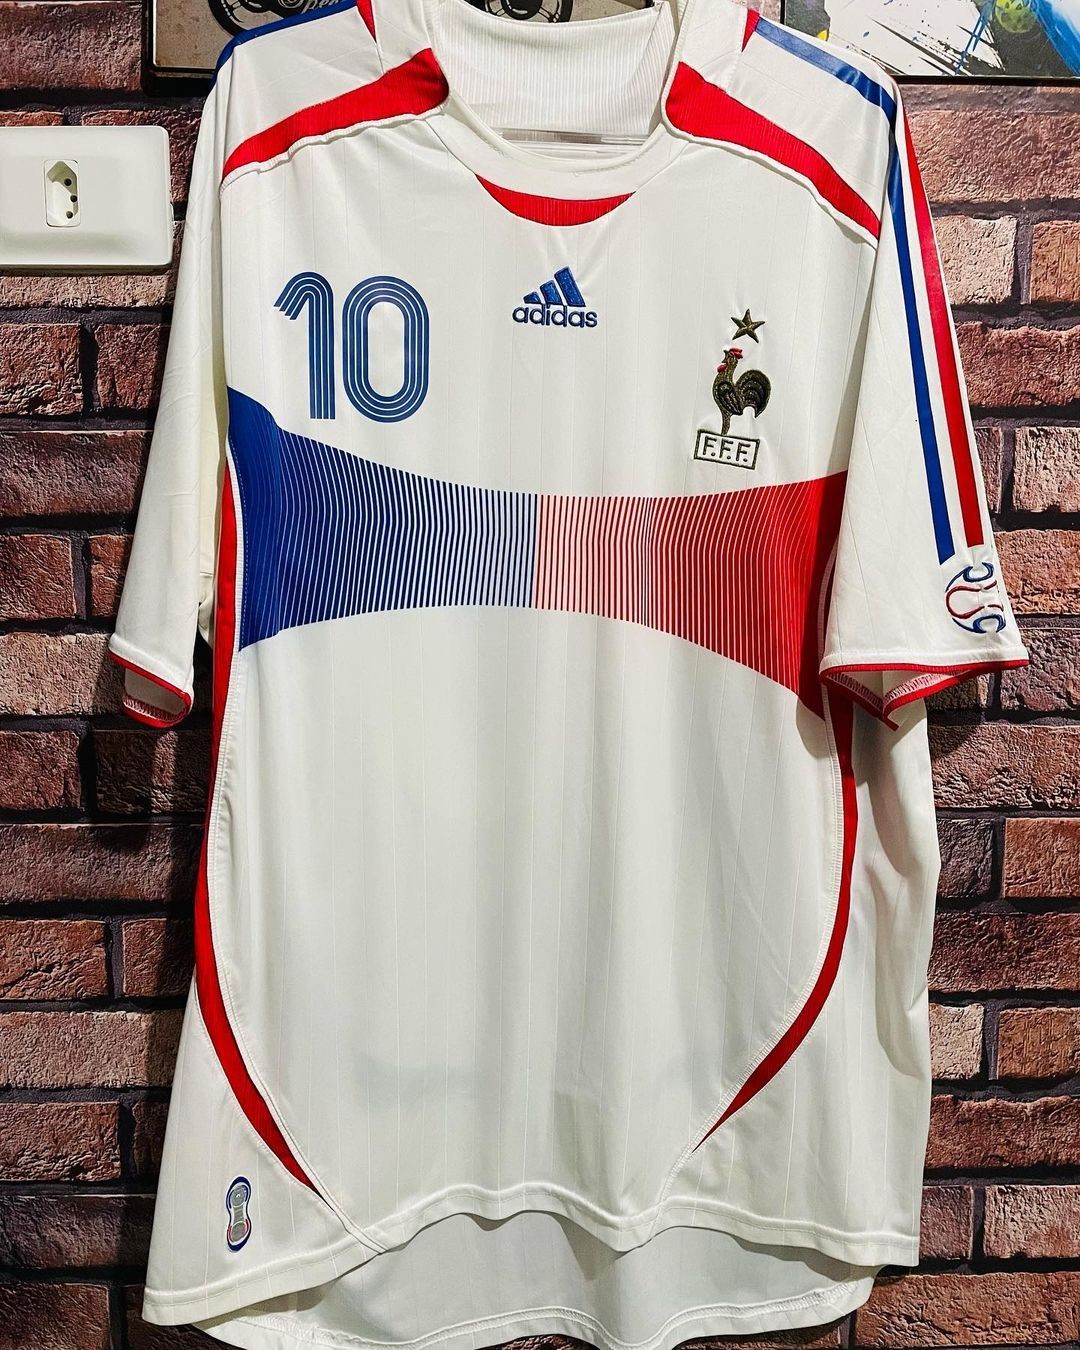 Primary image for France 2006 Away Jersey with Zidane 10 printing /LIMITED EDITION